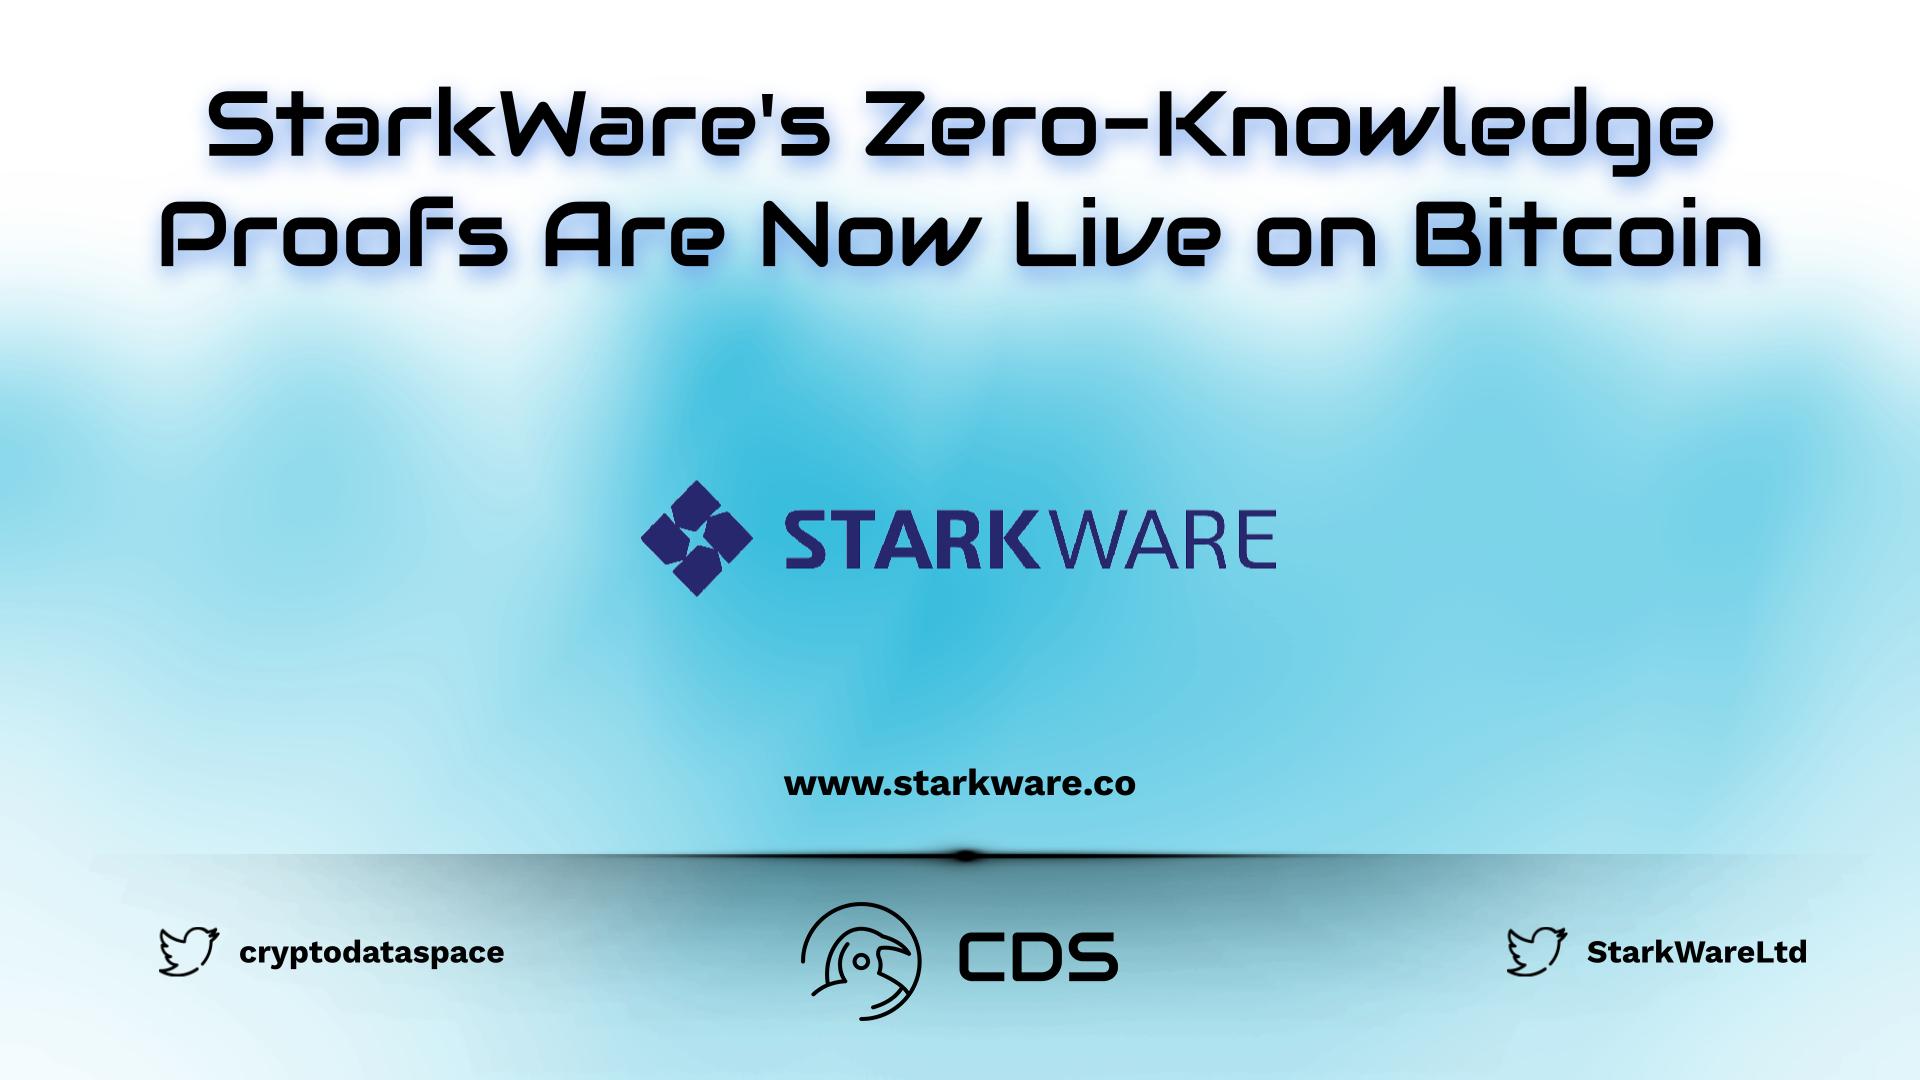 StarkWare's Zero-Knowledge Proofs Are Now Live on Bitcoin